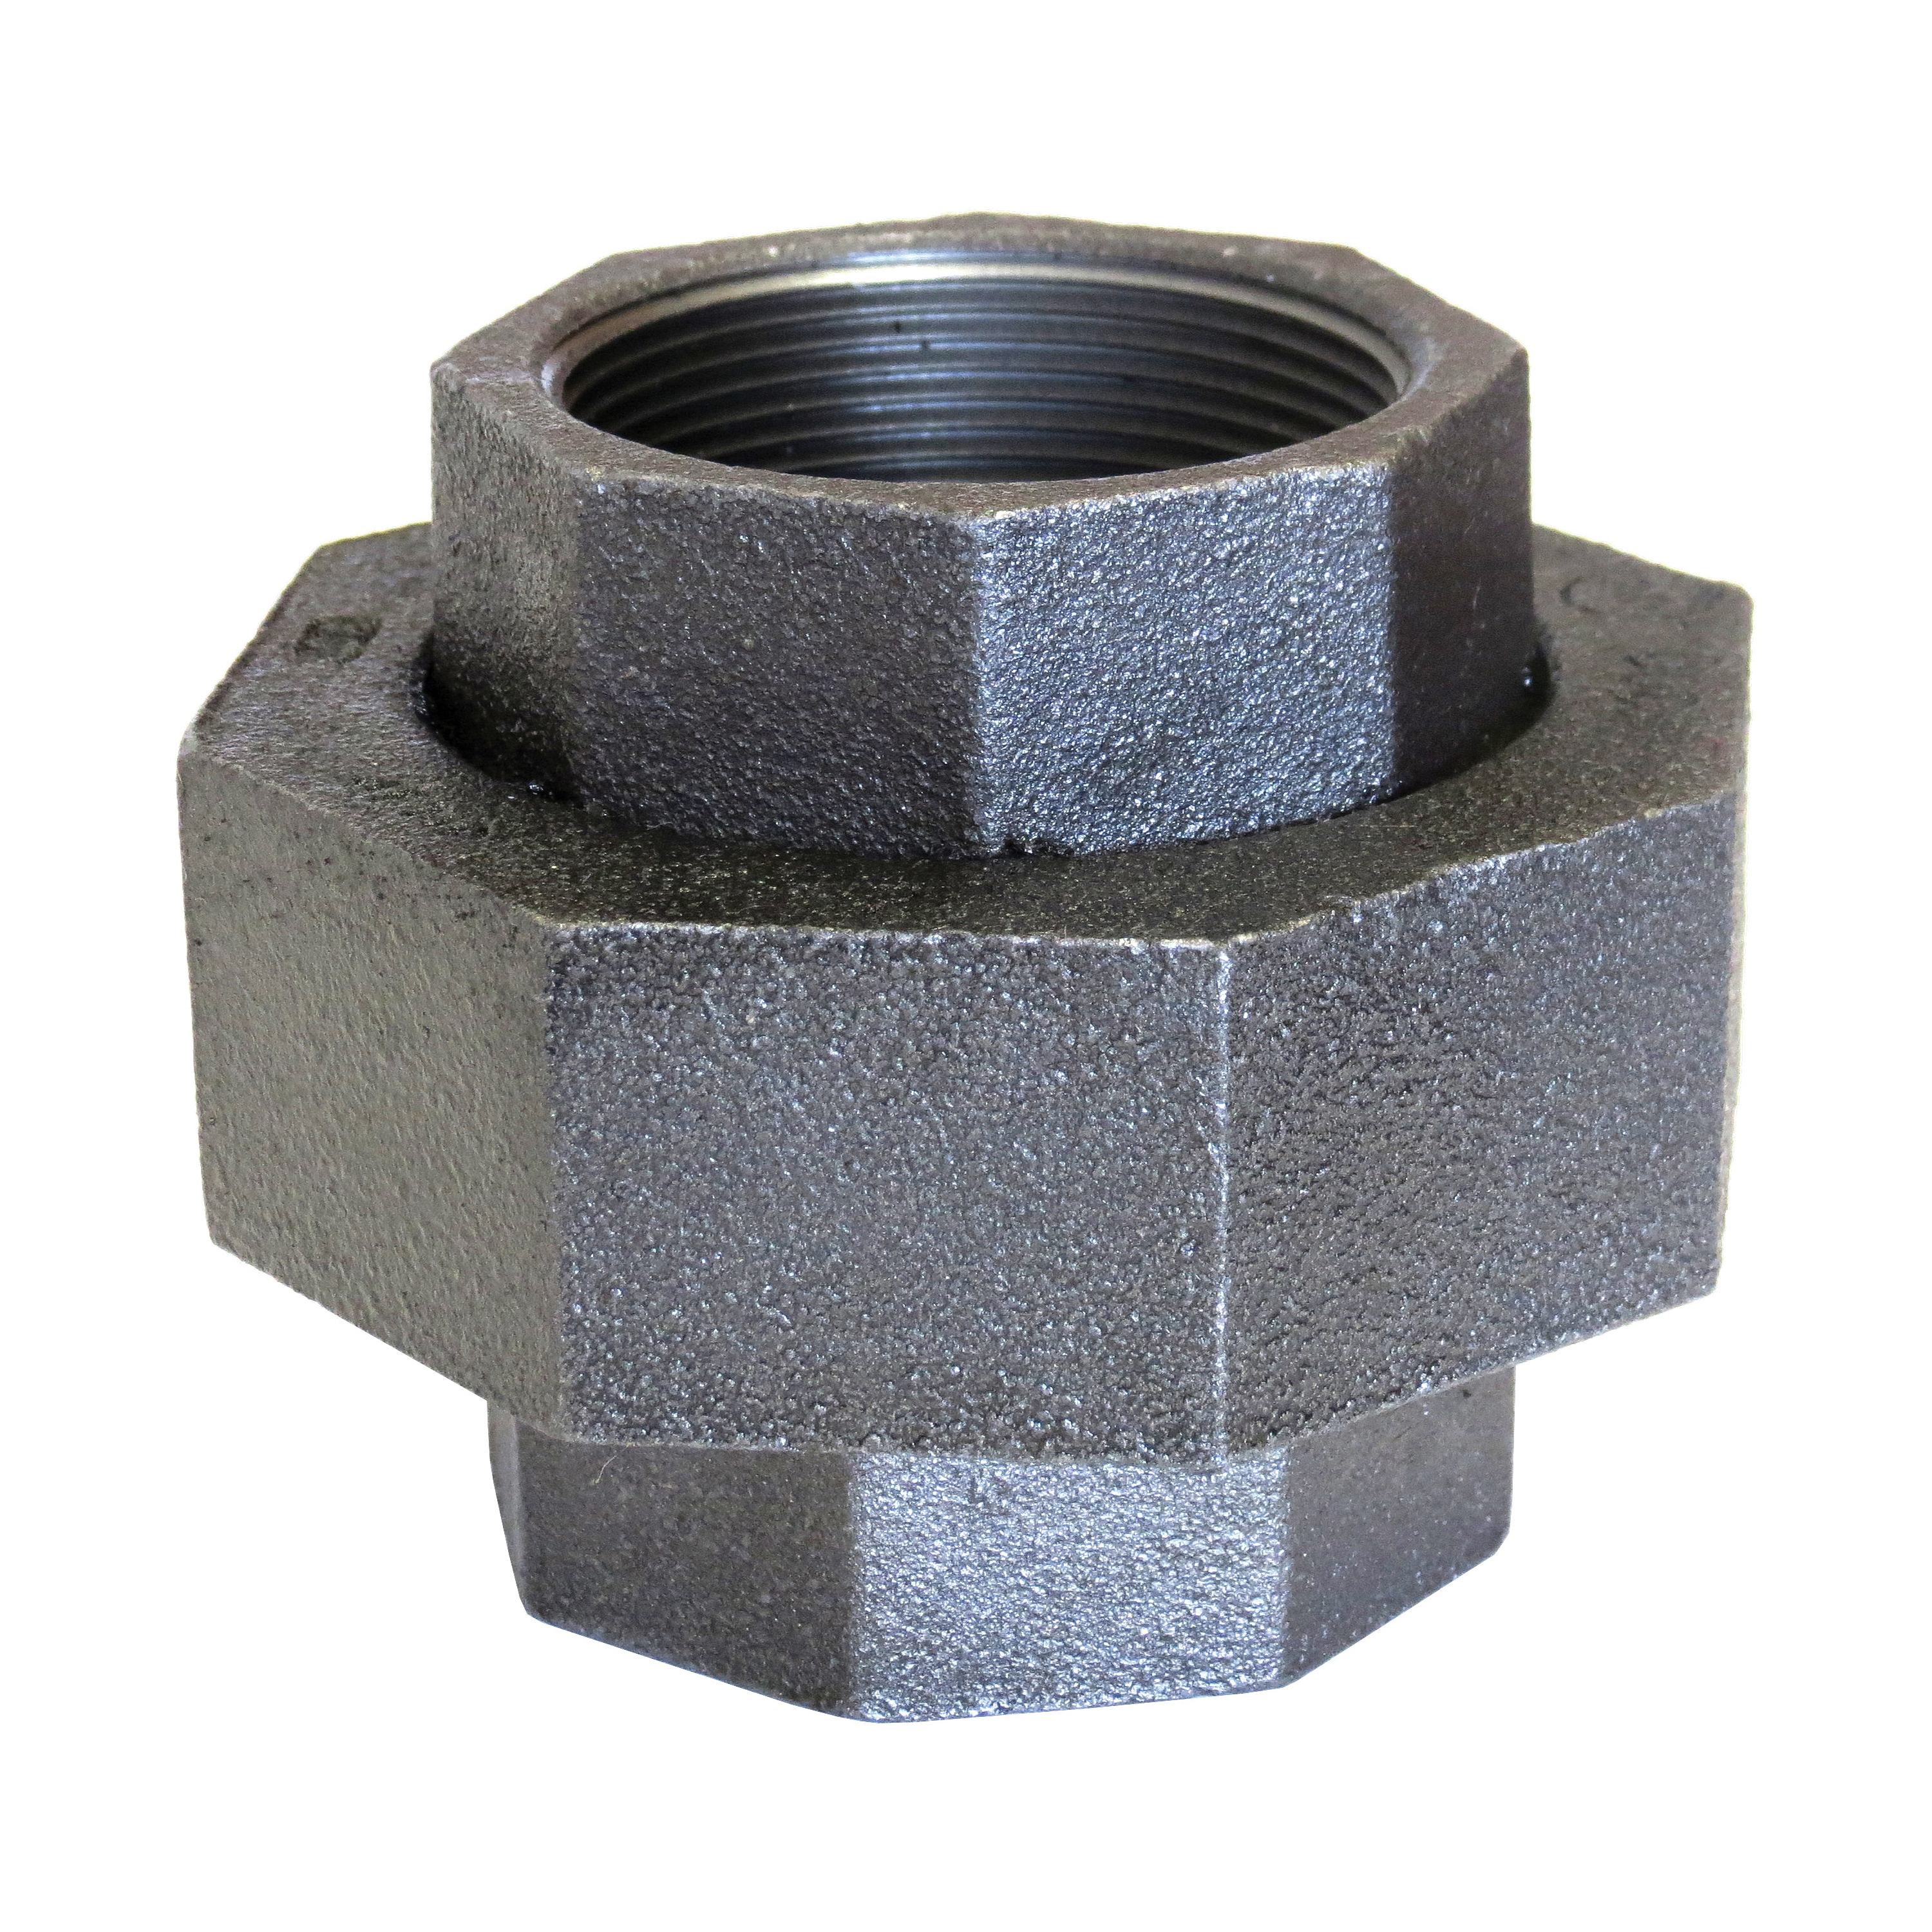 Anvil® 0312822802 FIG 459 Ground Joint Pipe Union, 3 in Nominal, FNPT End Style, 300 lb, Malleable Iron, Black Oxide, Domestic